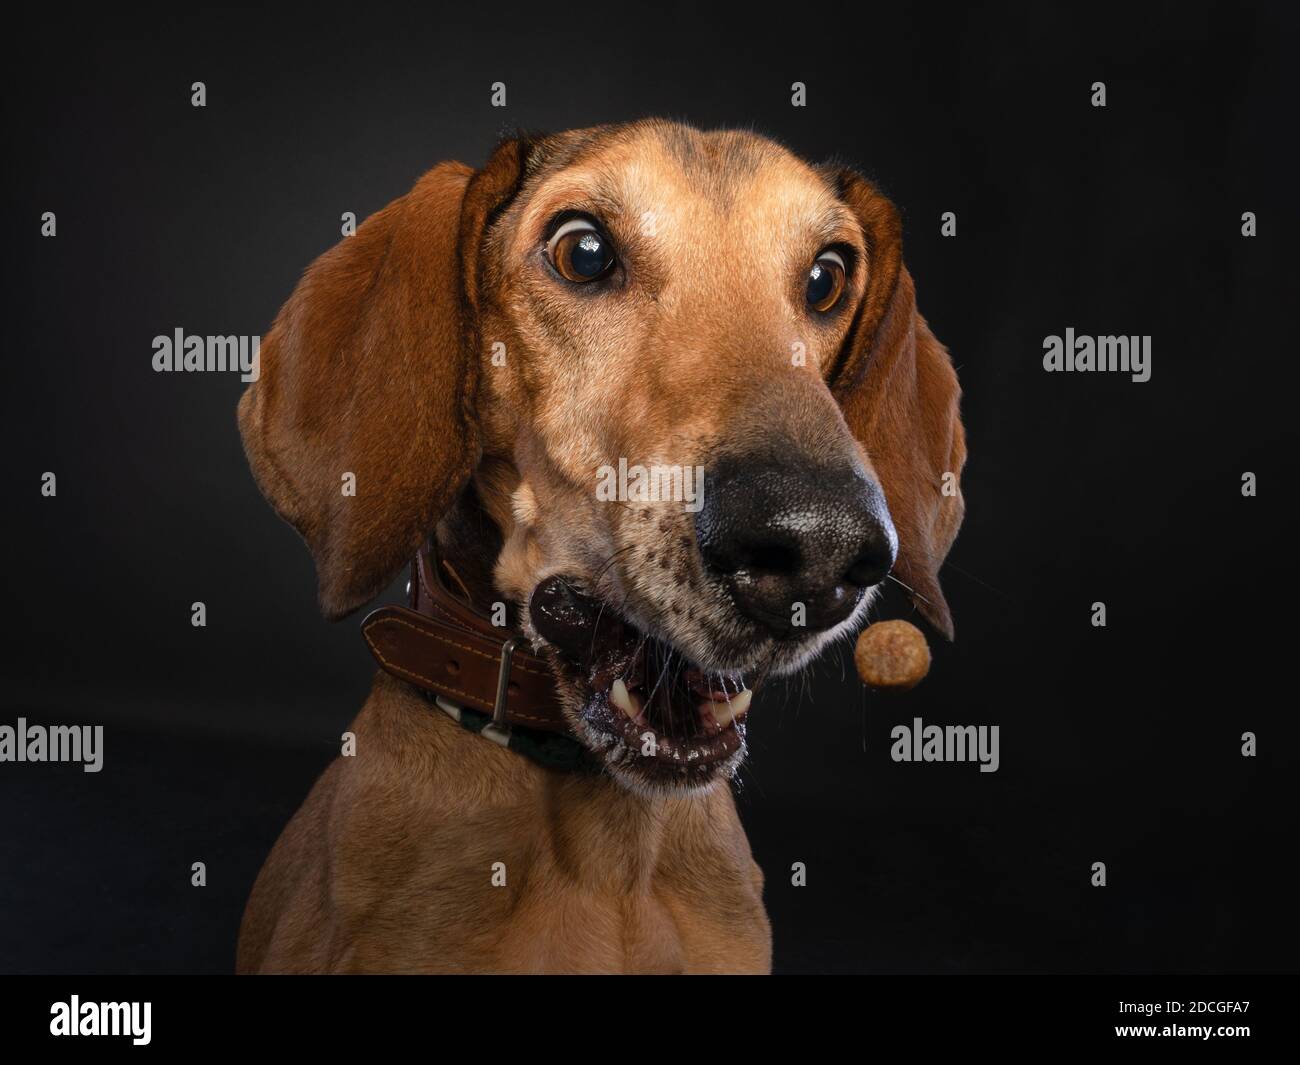 Close up studio portrait of a brown Segugio Italiano dog making a funny face while catching a treat. Stock Photo